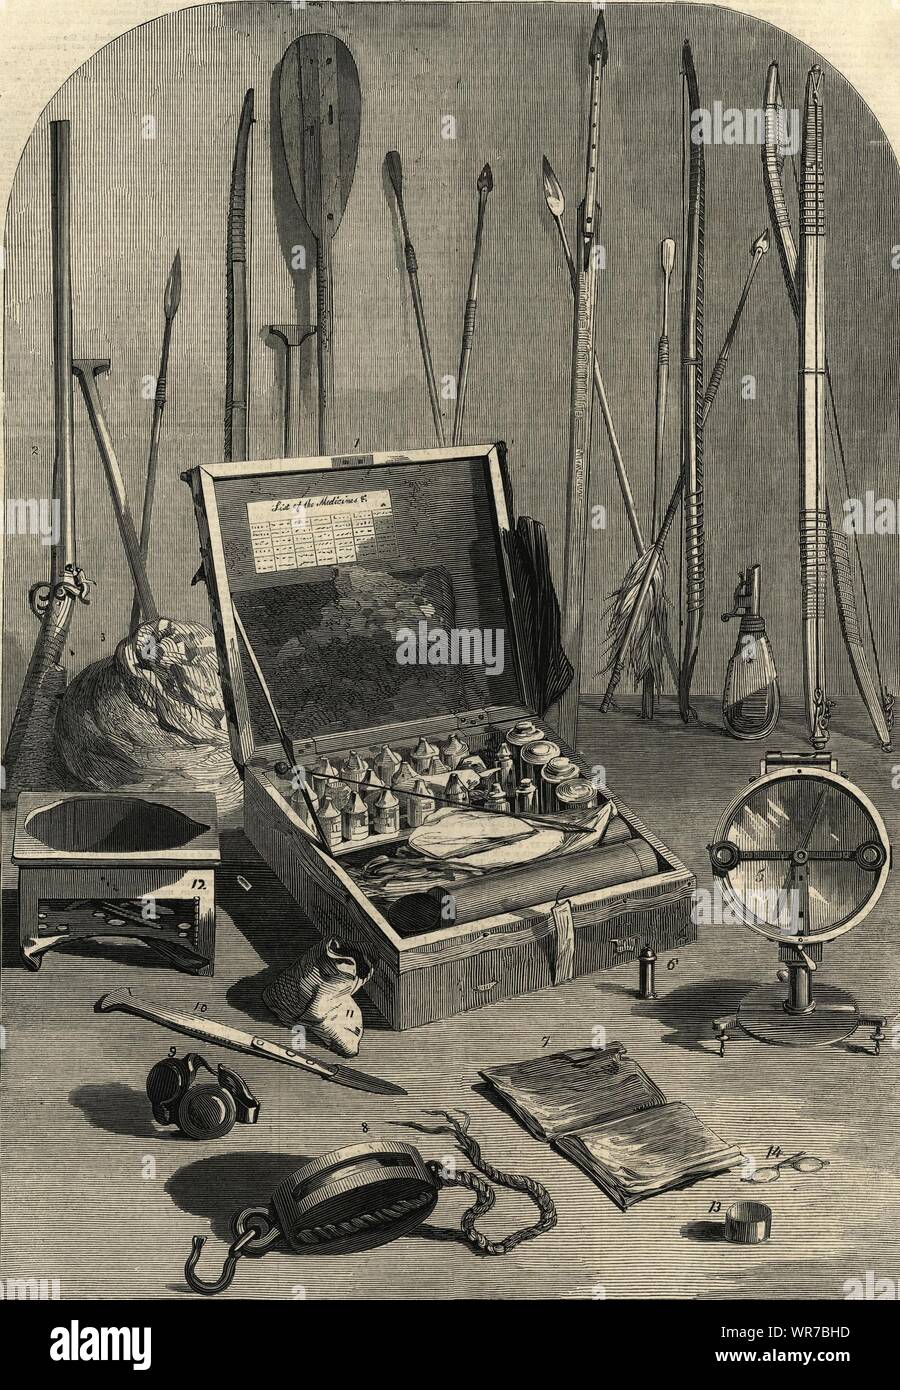 Relics of the Franklin Expedition. Explorers. Arctic 1859 ILN full page print Stock Photo